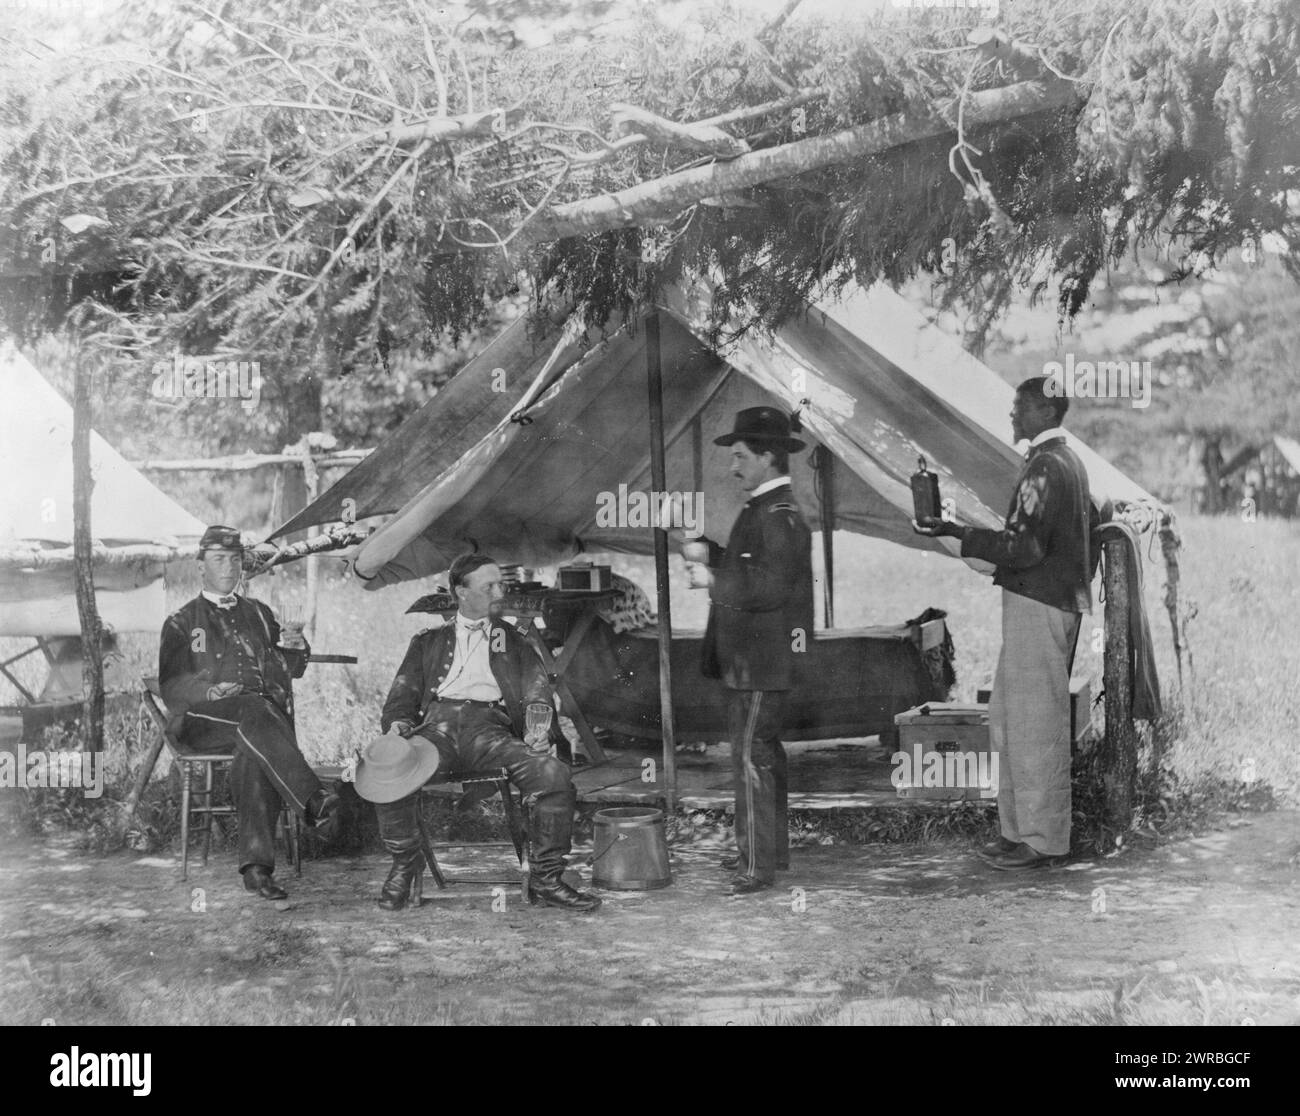 Maj. H.H. Humphrey and others, Three Civil War Union soldiers, drinking outside a canopied living quarters area, African American on right holding bottle., Smith, William Morris, photographer, 1865 June., Humphrey, H. H., Military service, Group portraits, 1860-1870., Portrait photographs, 1860-1870, Group portraits, 1860-1870, 1 photographic print Stock Photo